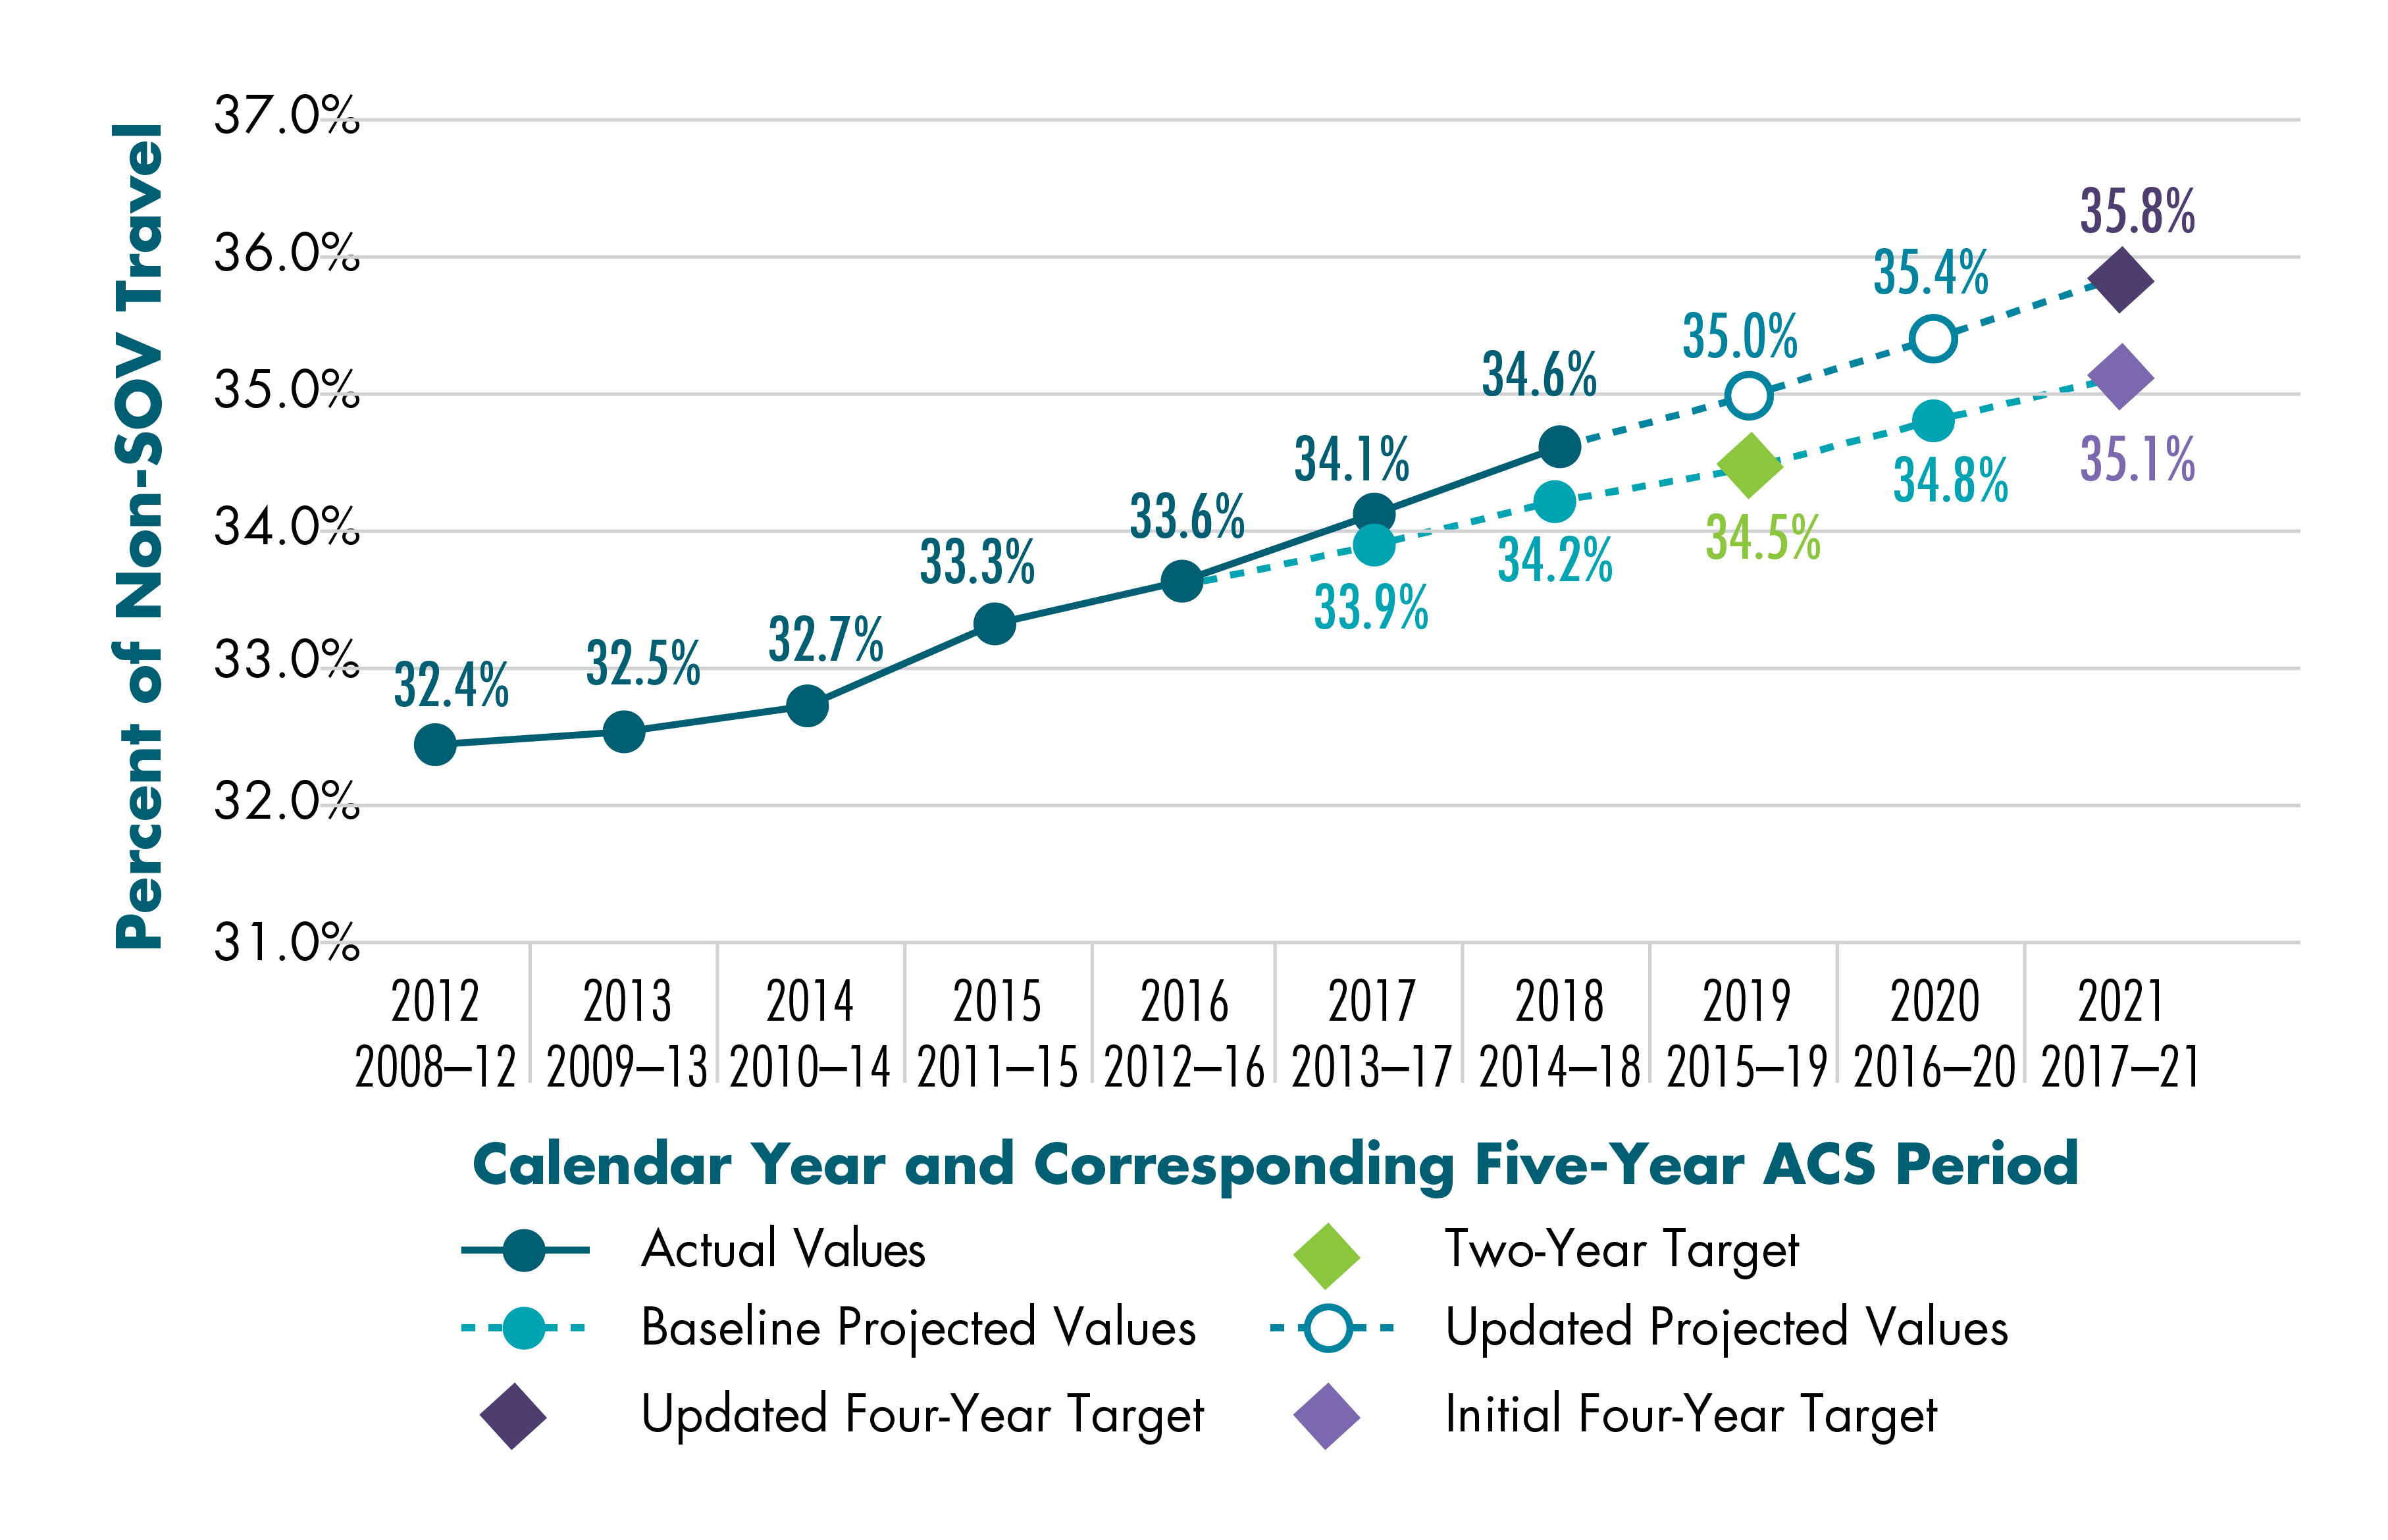 Figure 4-9 shows actual values for the percent of non-SOV vehicle travel in the Boston MA-NH-RI UZA based on five-year American Community Survey estimates. This chart also shows both the UZA’s original projected linear trend line, a revised projected linear trend line, and the Boston MA-NH-RI UZA’s two-year and four-year targets for the percent of non-SOV travel.